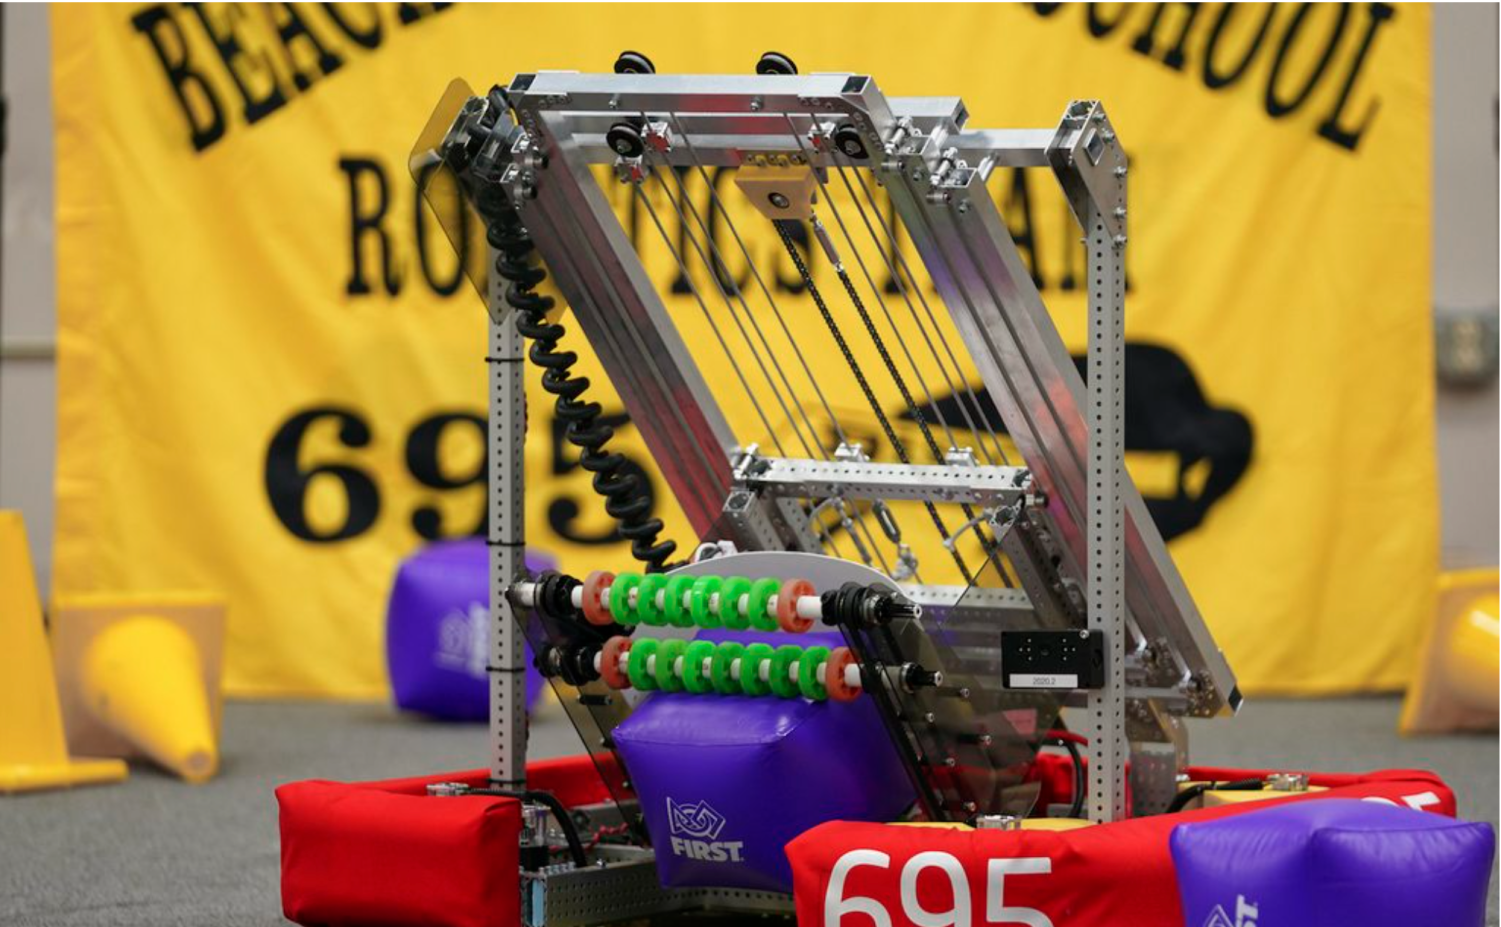 Team 695 participated and won three regional competitions this year.